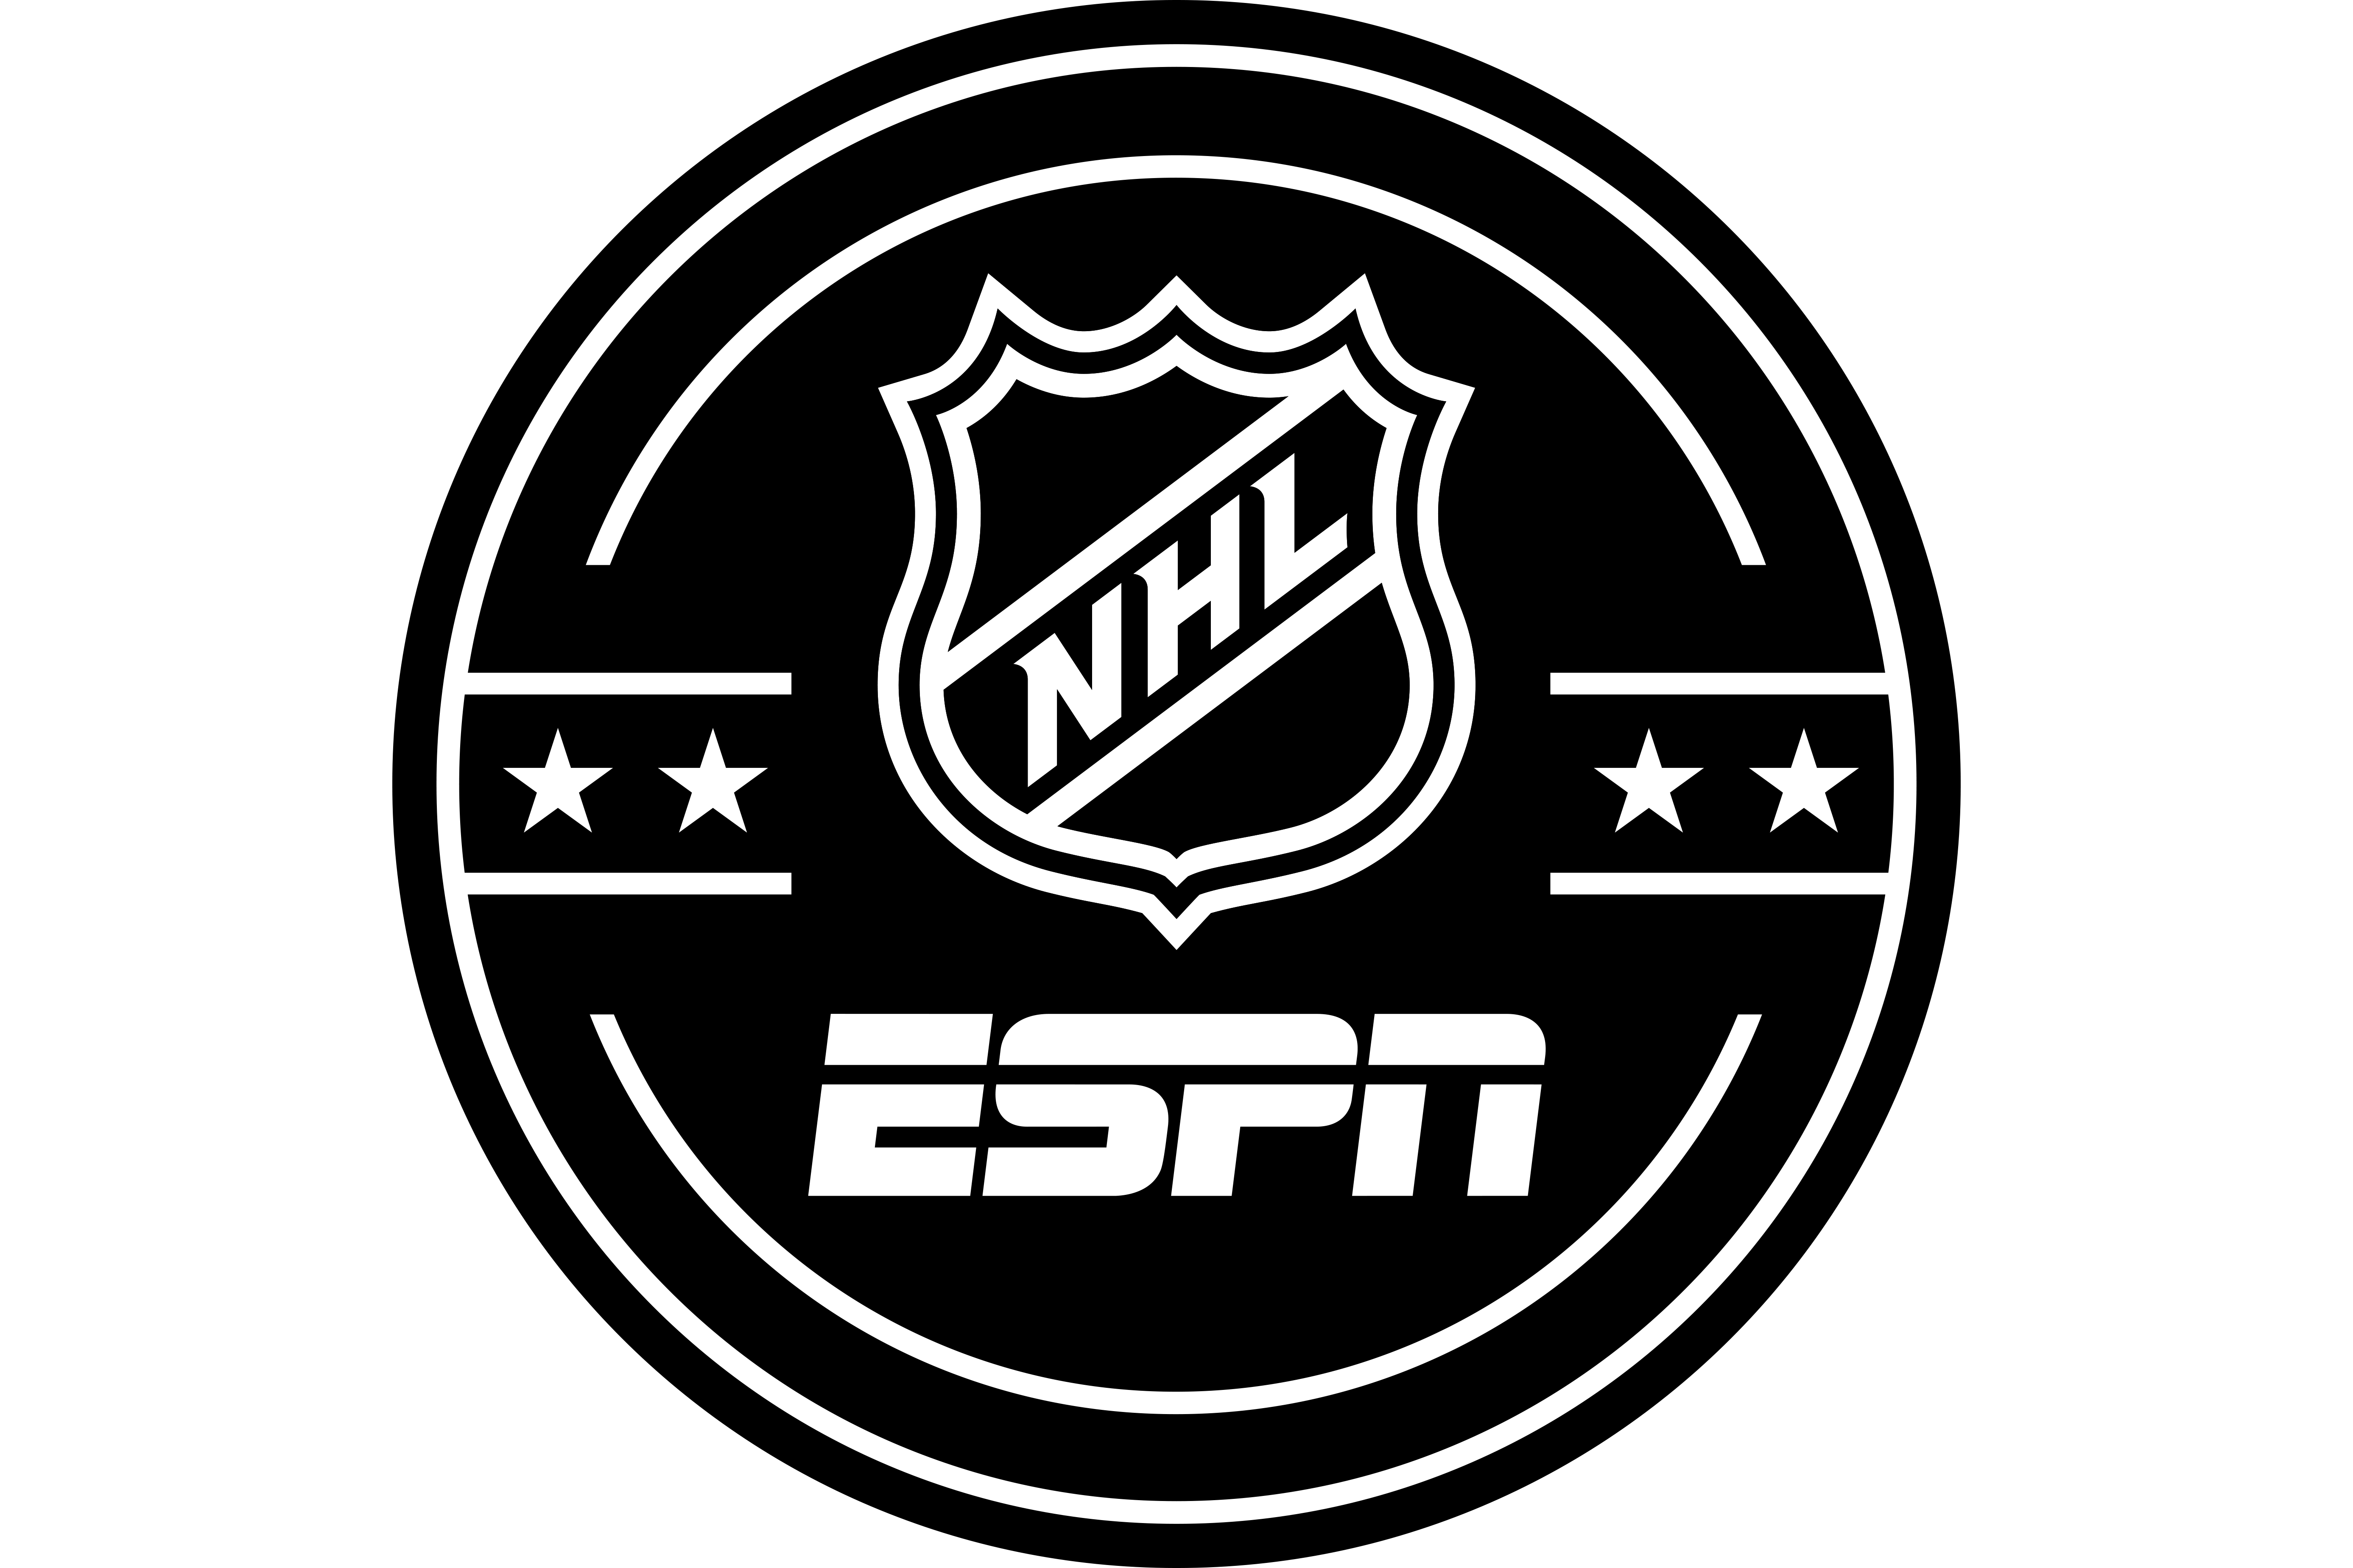 nhl network on streaming services